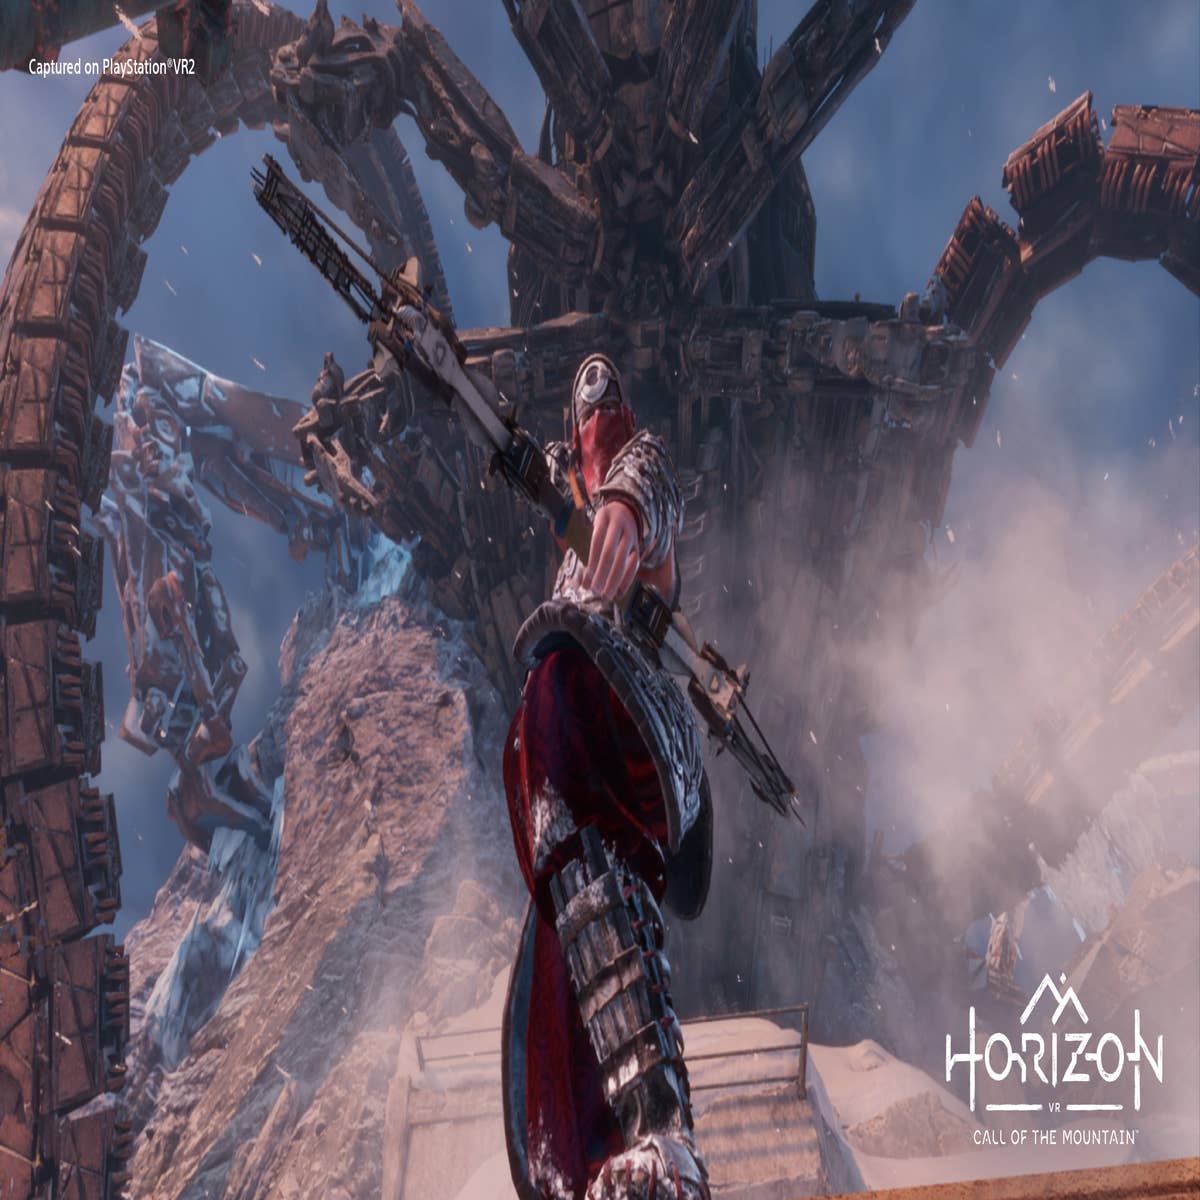 Horizon Call of the Mountain' VR game release date, trailer, and